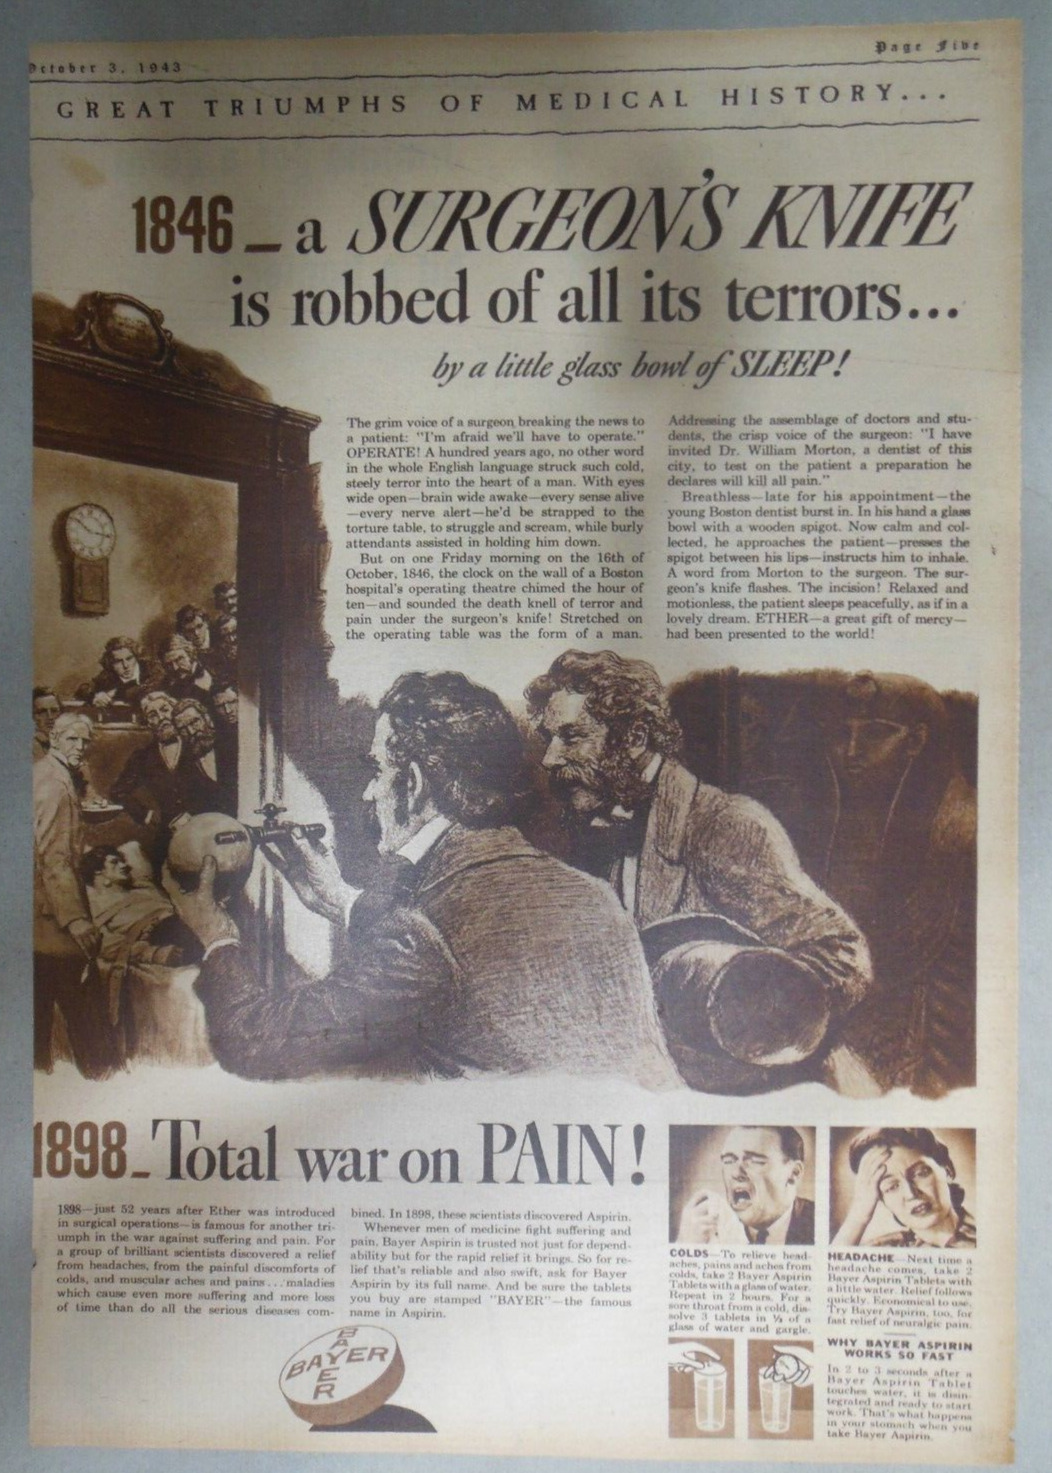 Bayer Aspirin Ad: Discovery of Ether Anesthetic  from 1943 Size: 11 x 15 inches